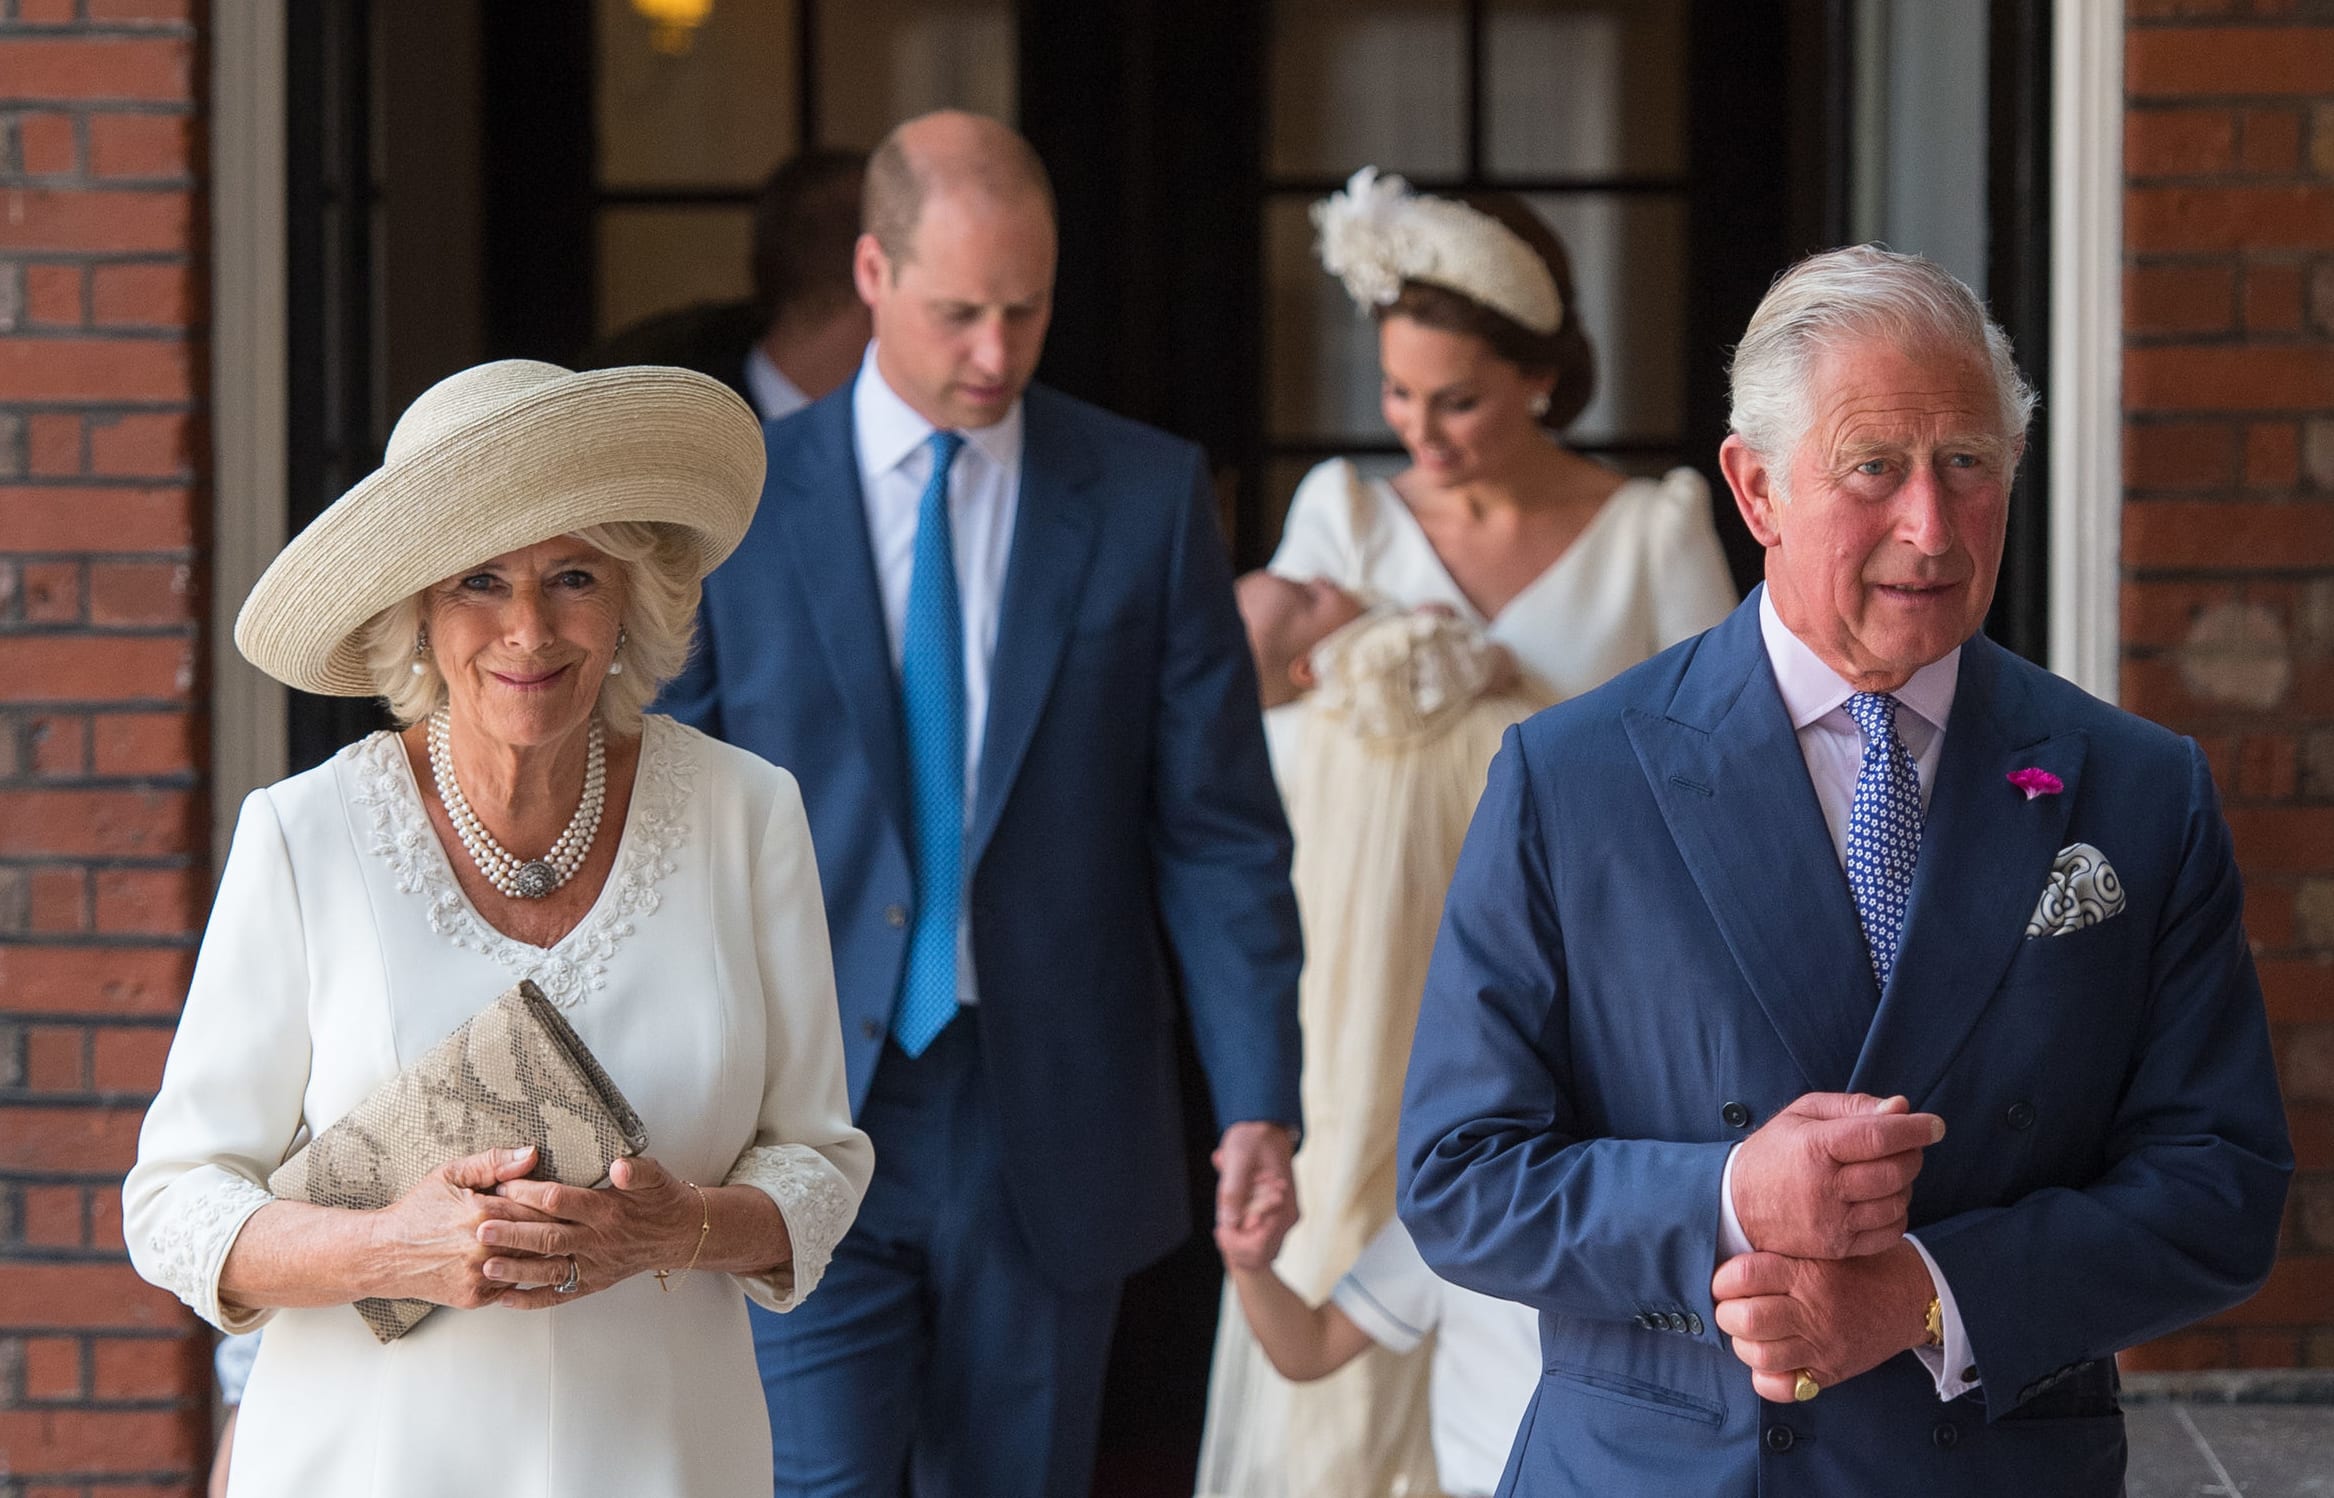 Britain's Prince Charles, Prince of Wales (R) and Britain's Camilla, Duchess of Cornwall arrive for the christening.